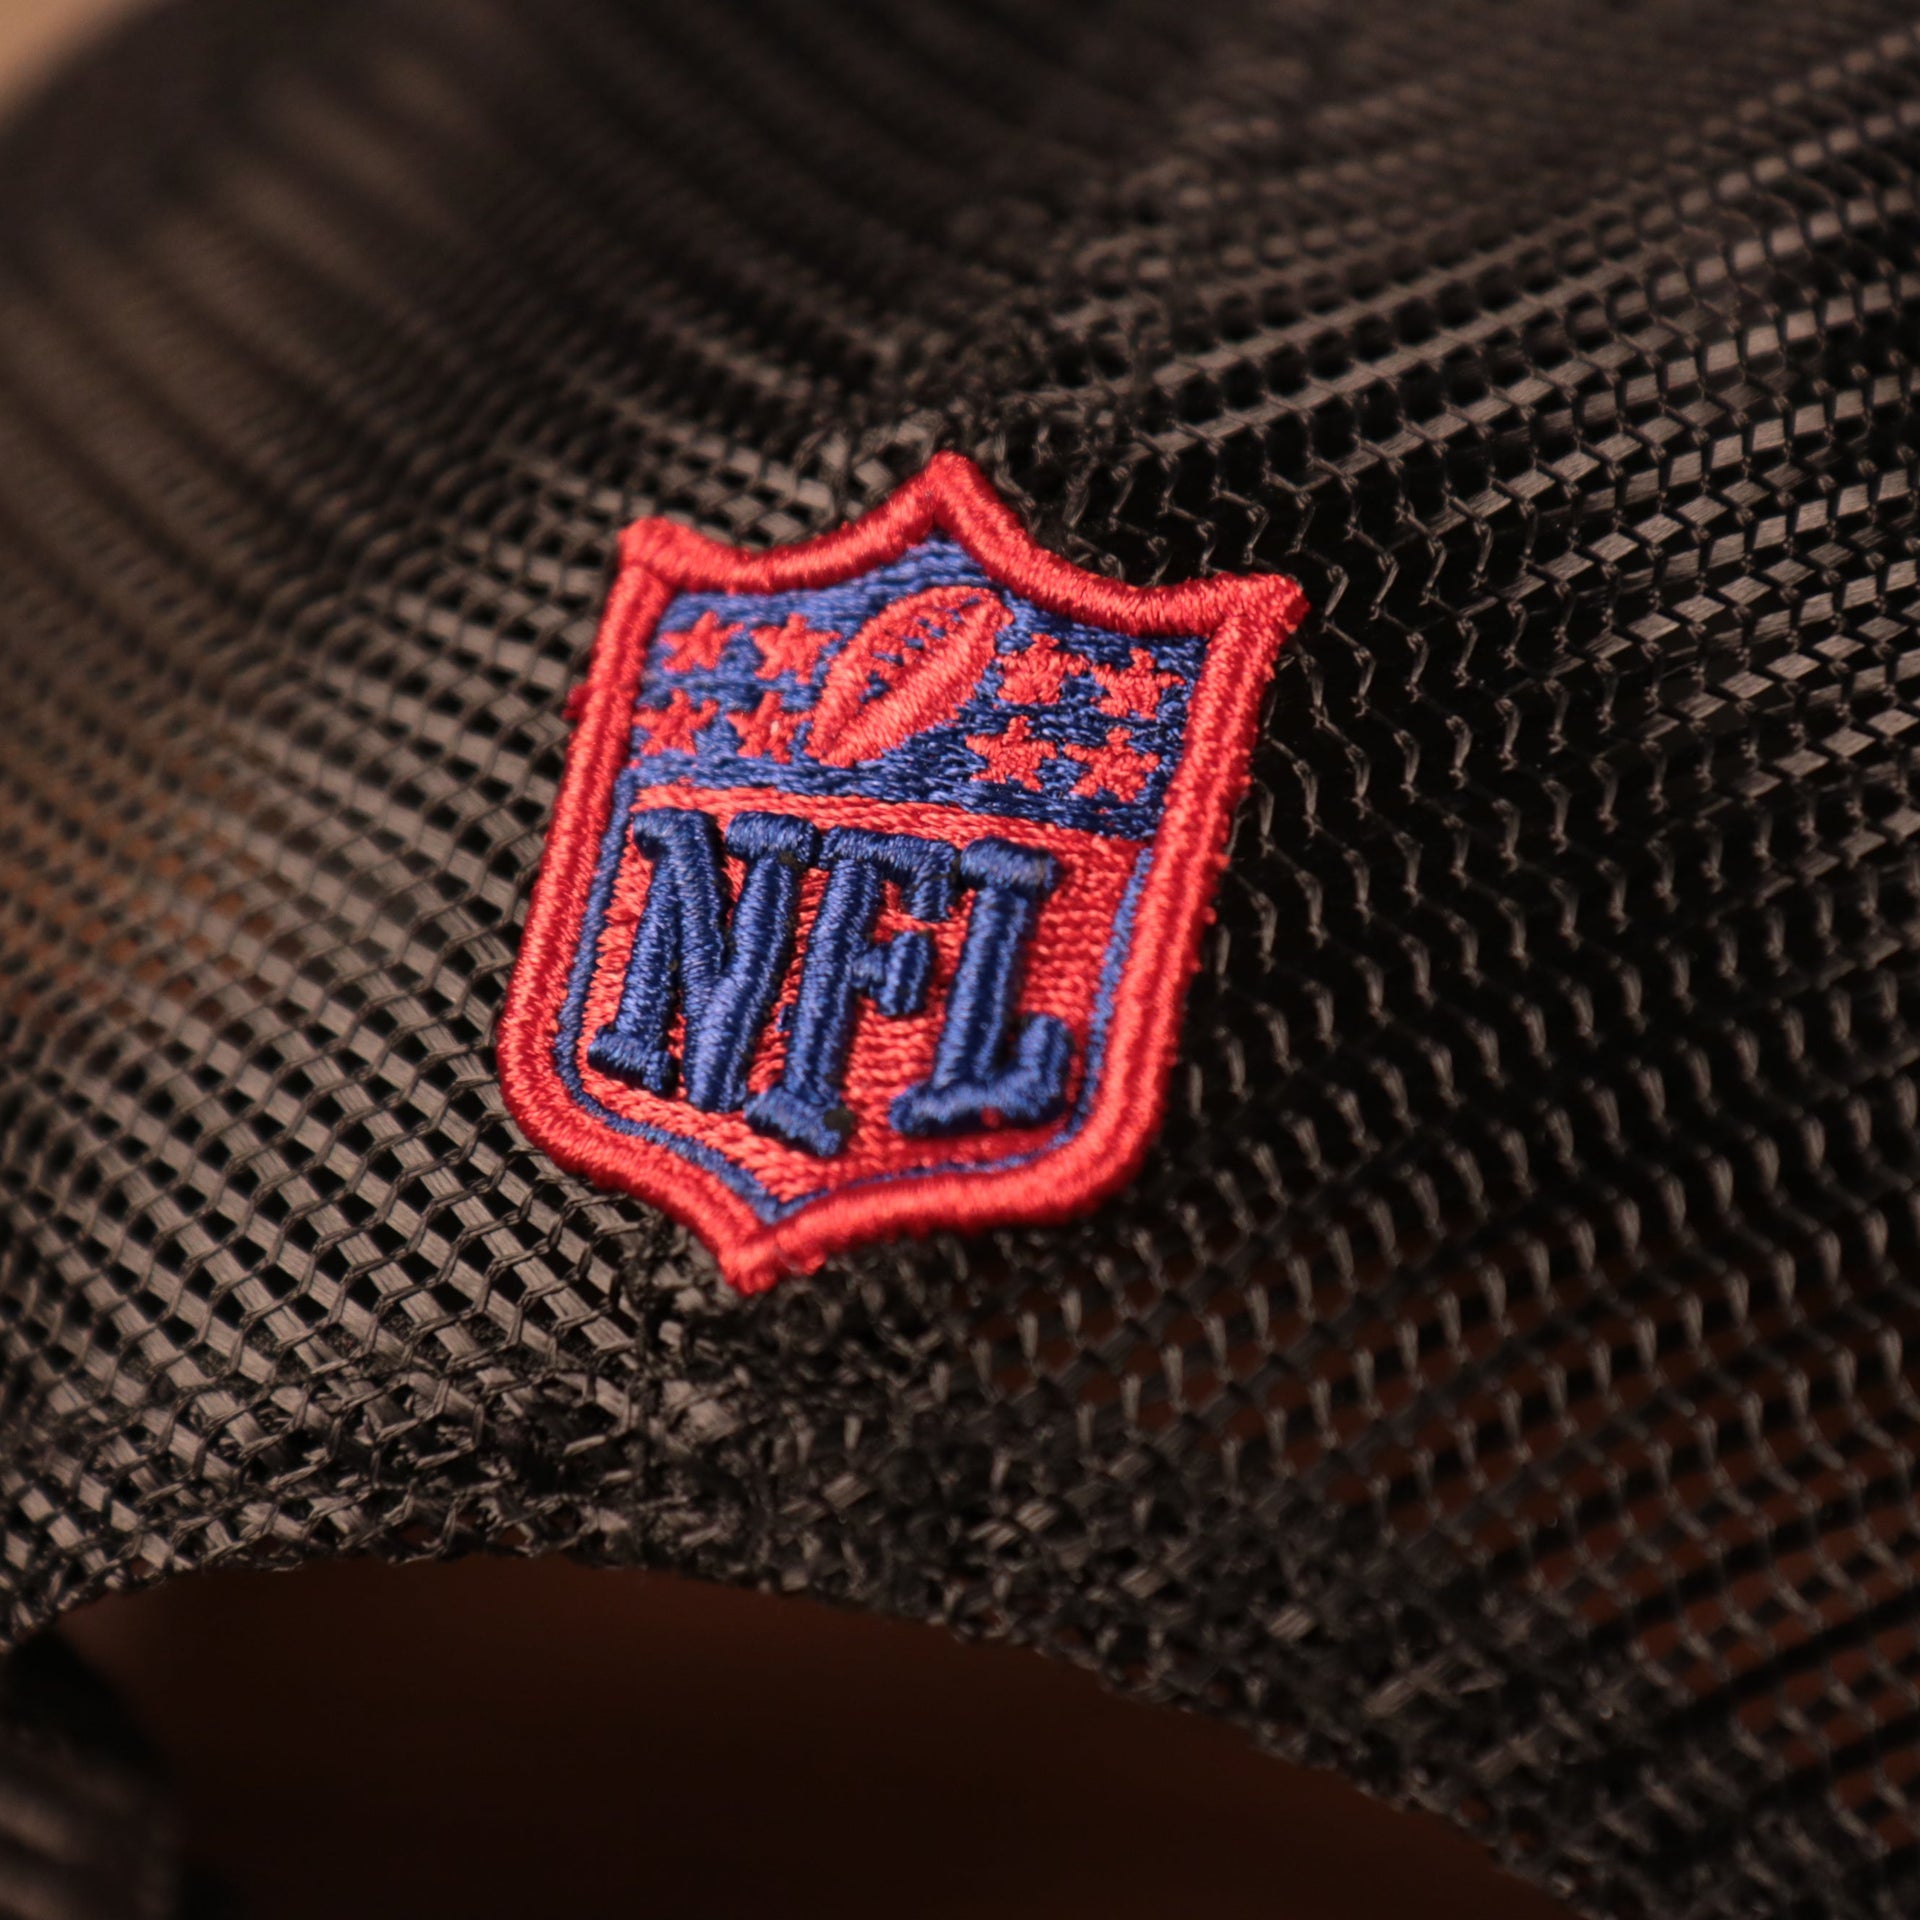 The NFL logo on the back of the New York Giants official 20201 NFL draft hat.